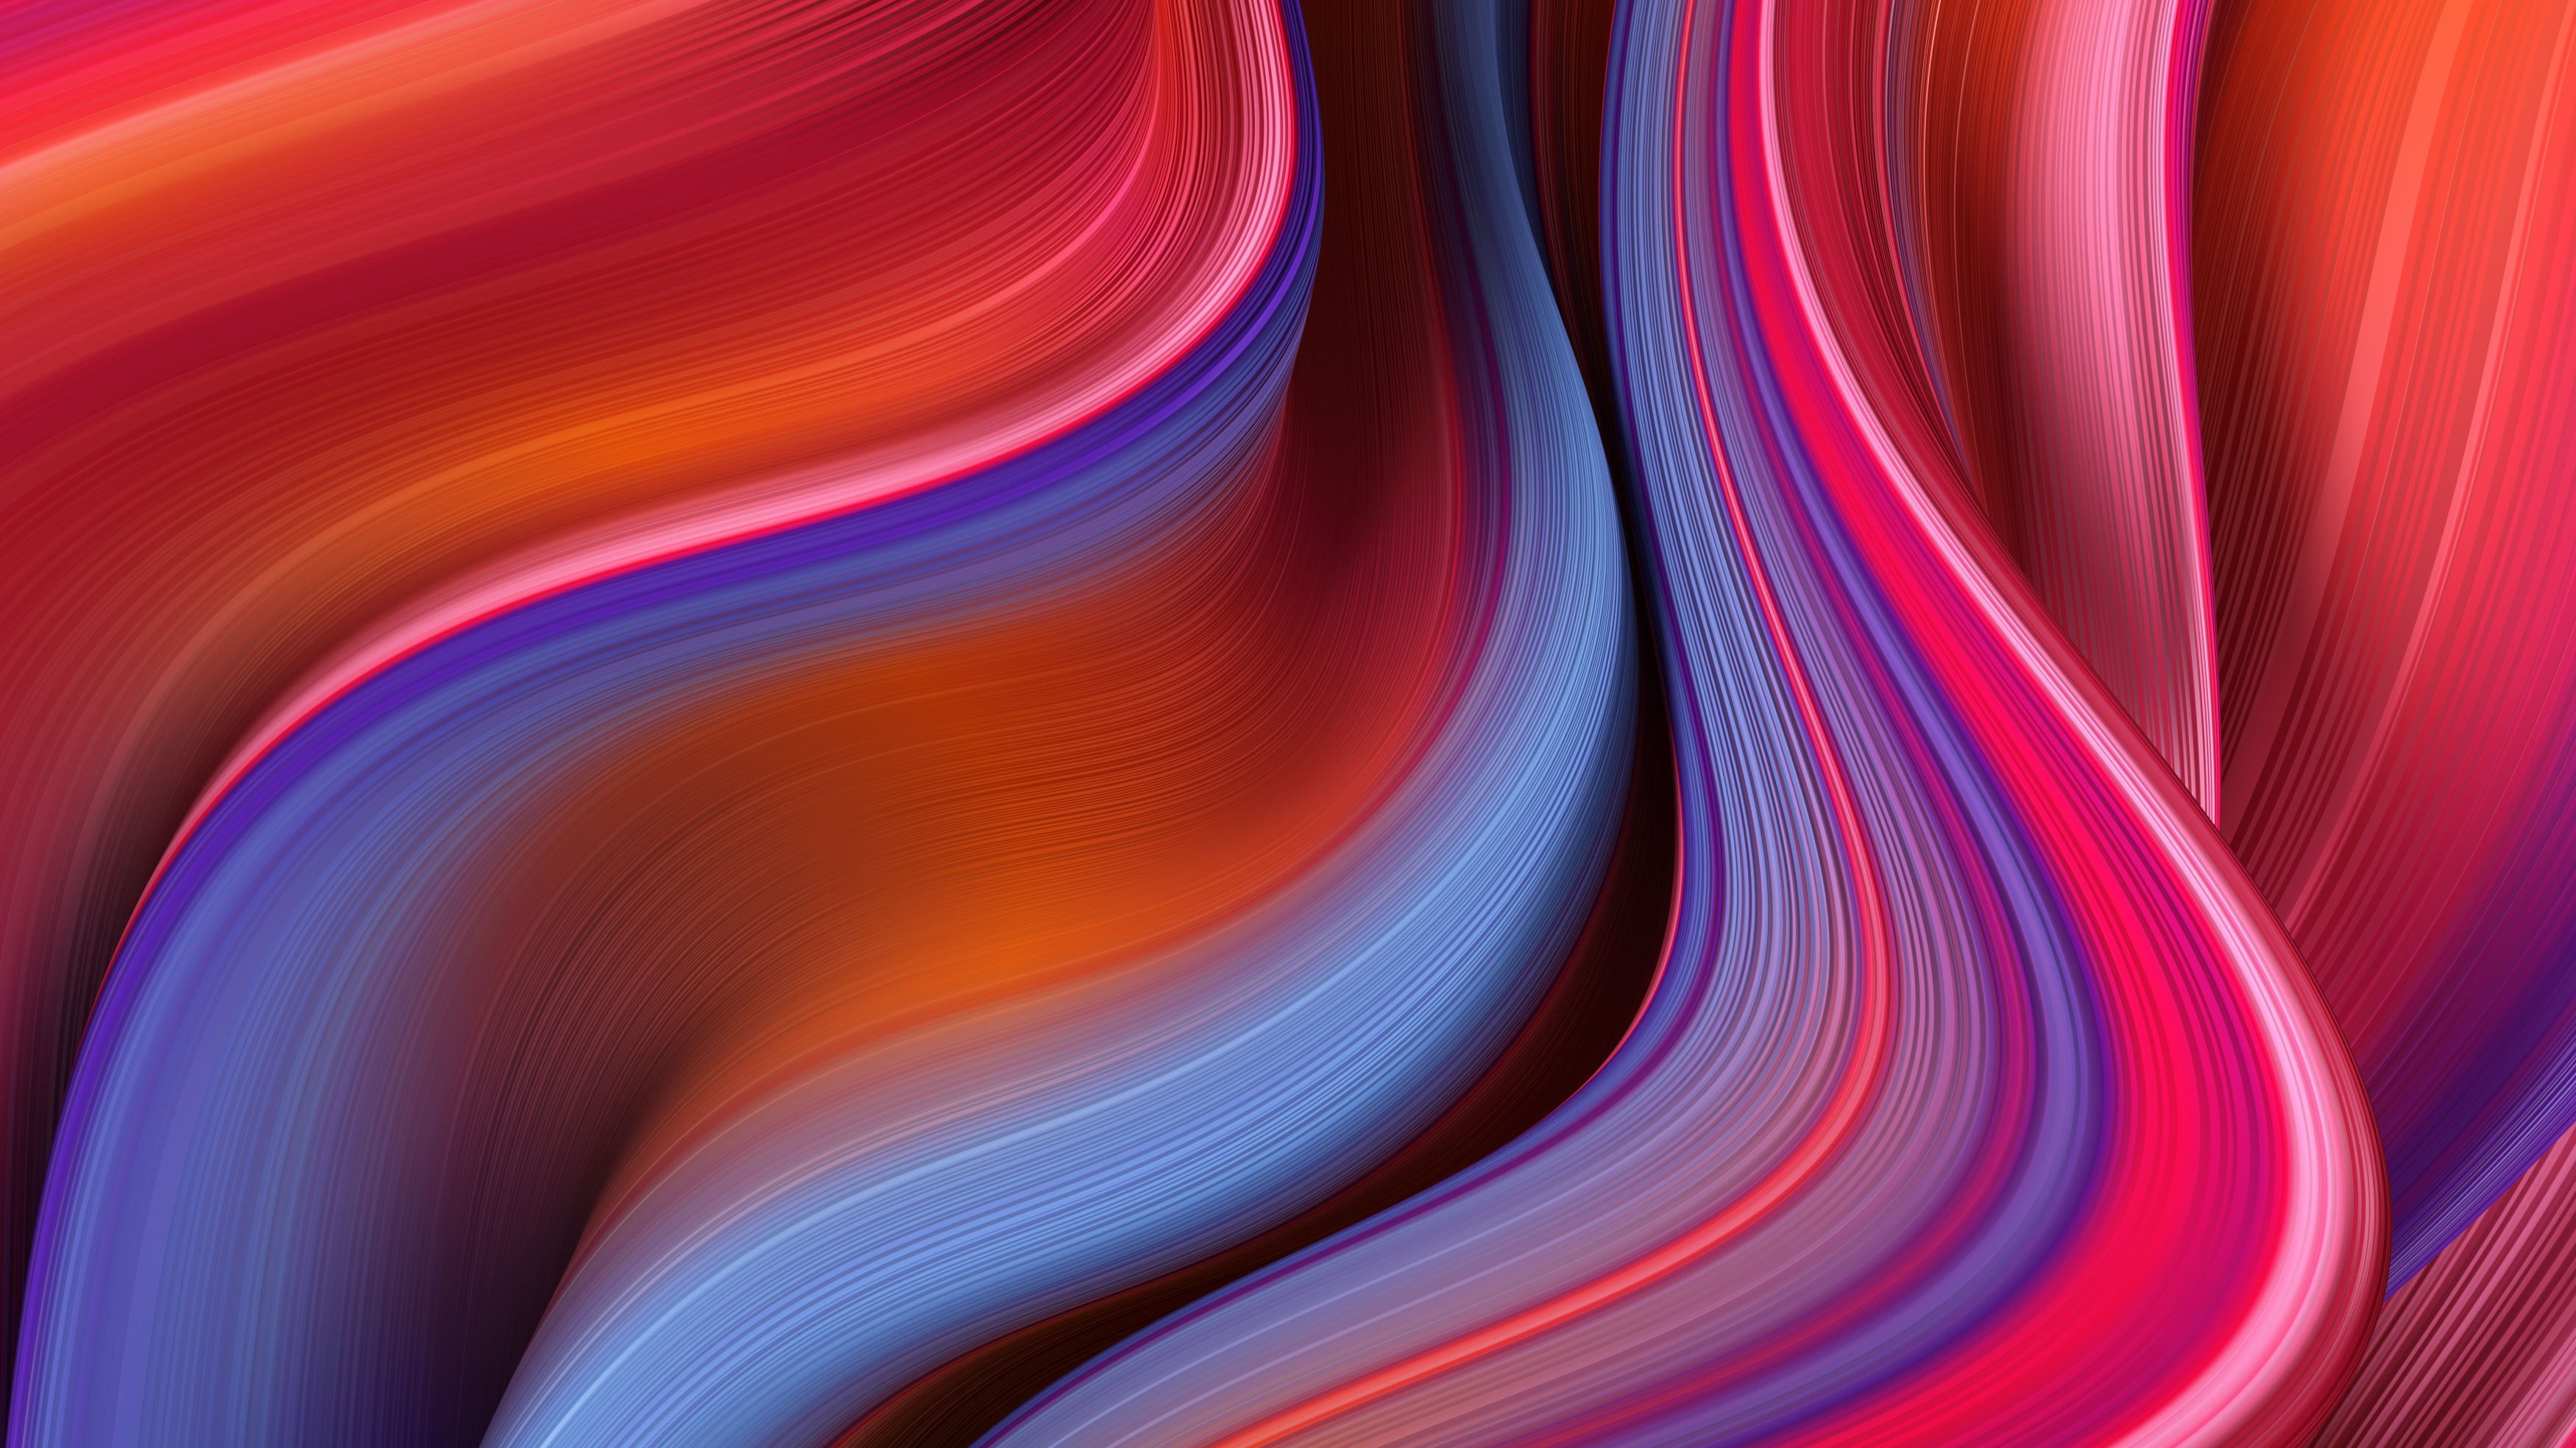 4k Abstract Art, HD Abstract, 4k Wallpapers, Images, Backgrounds